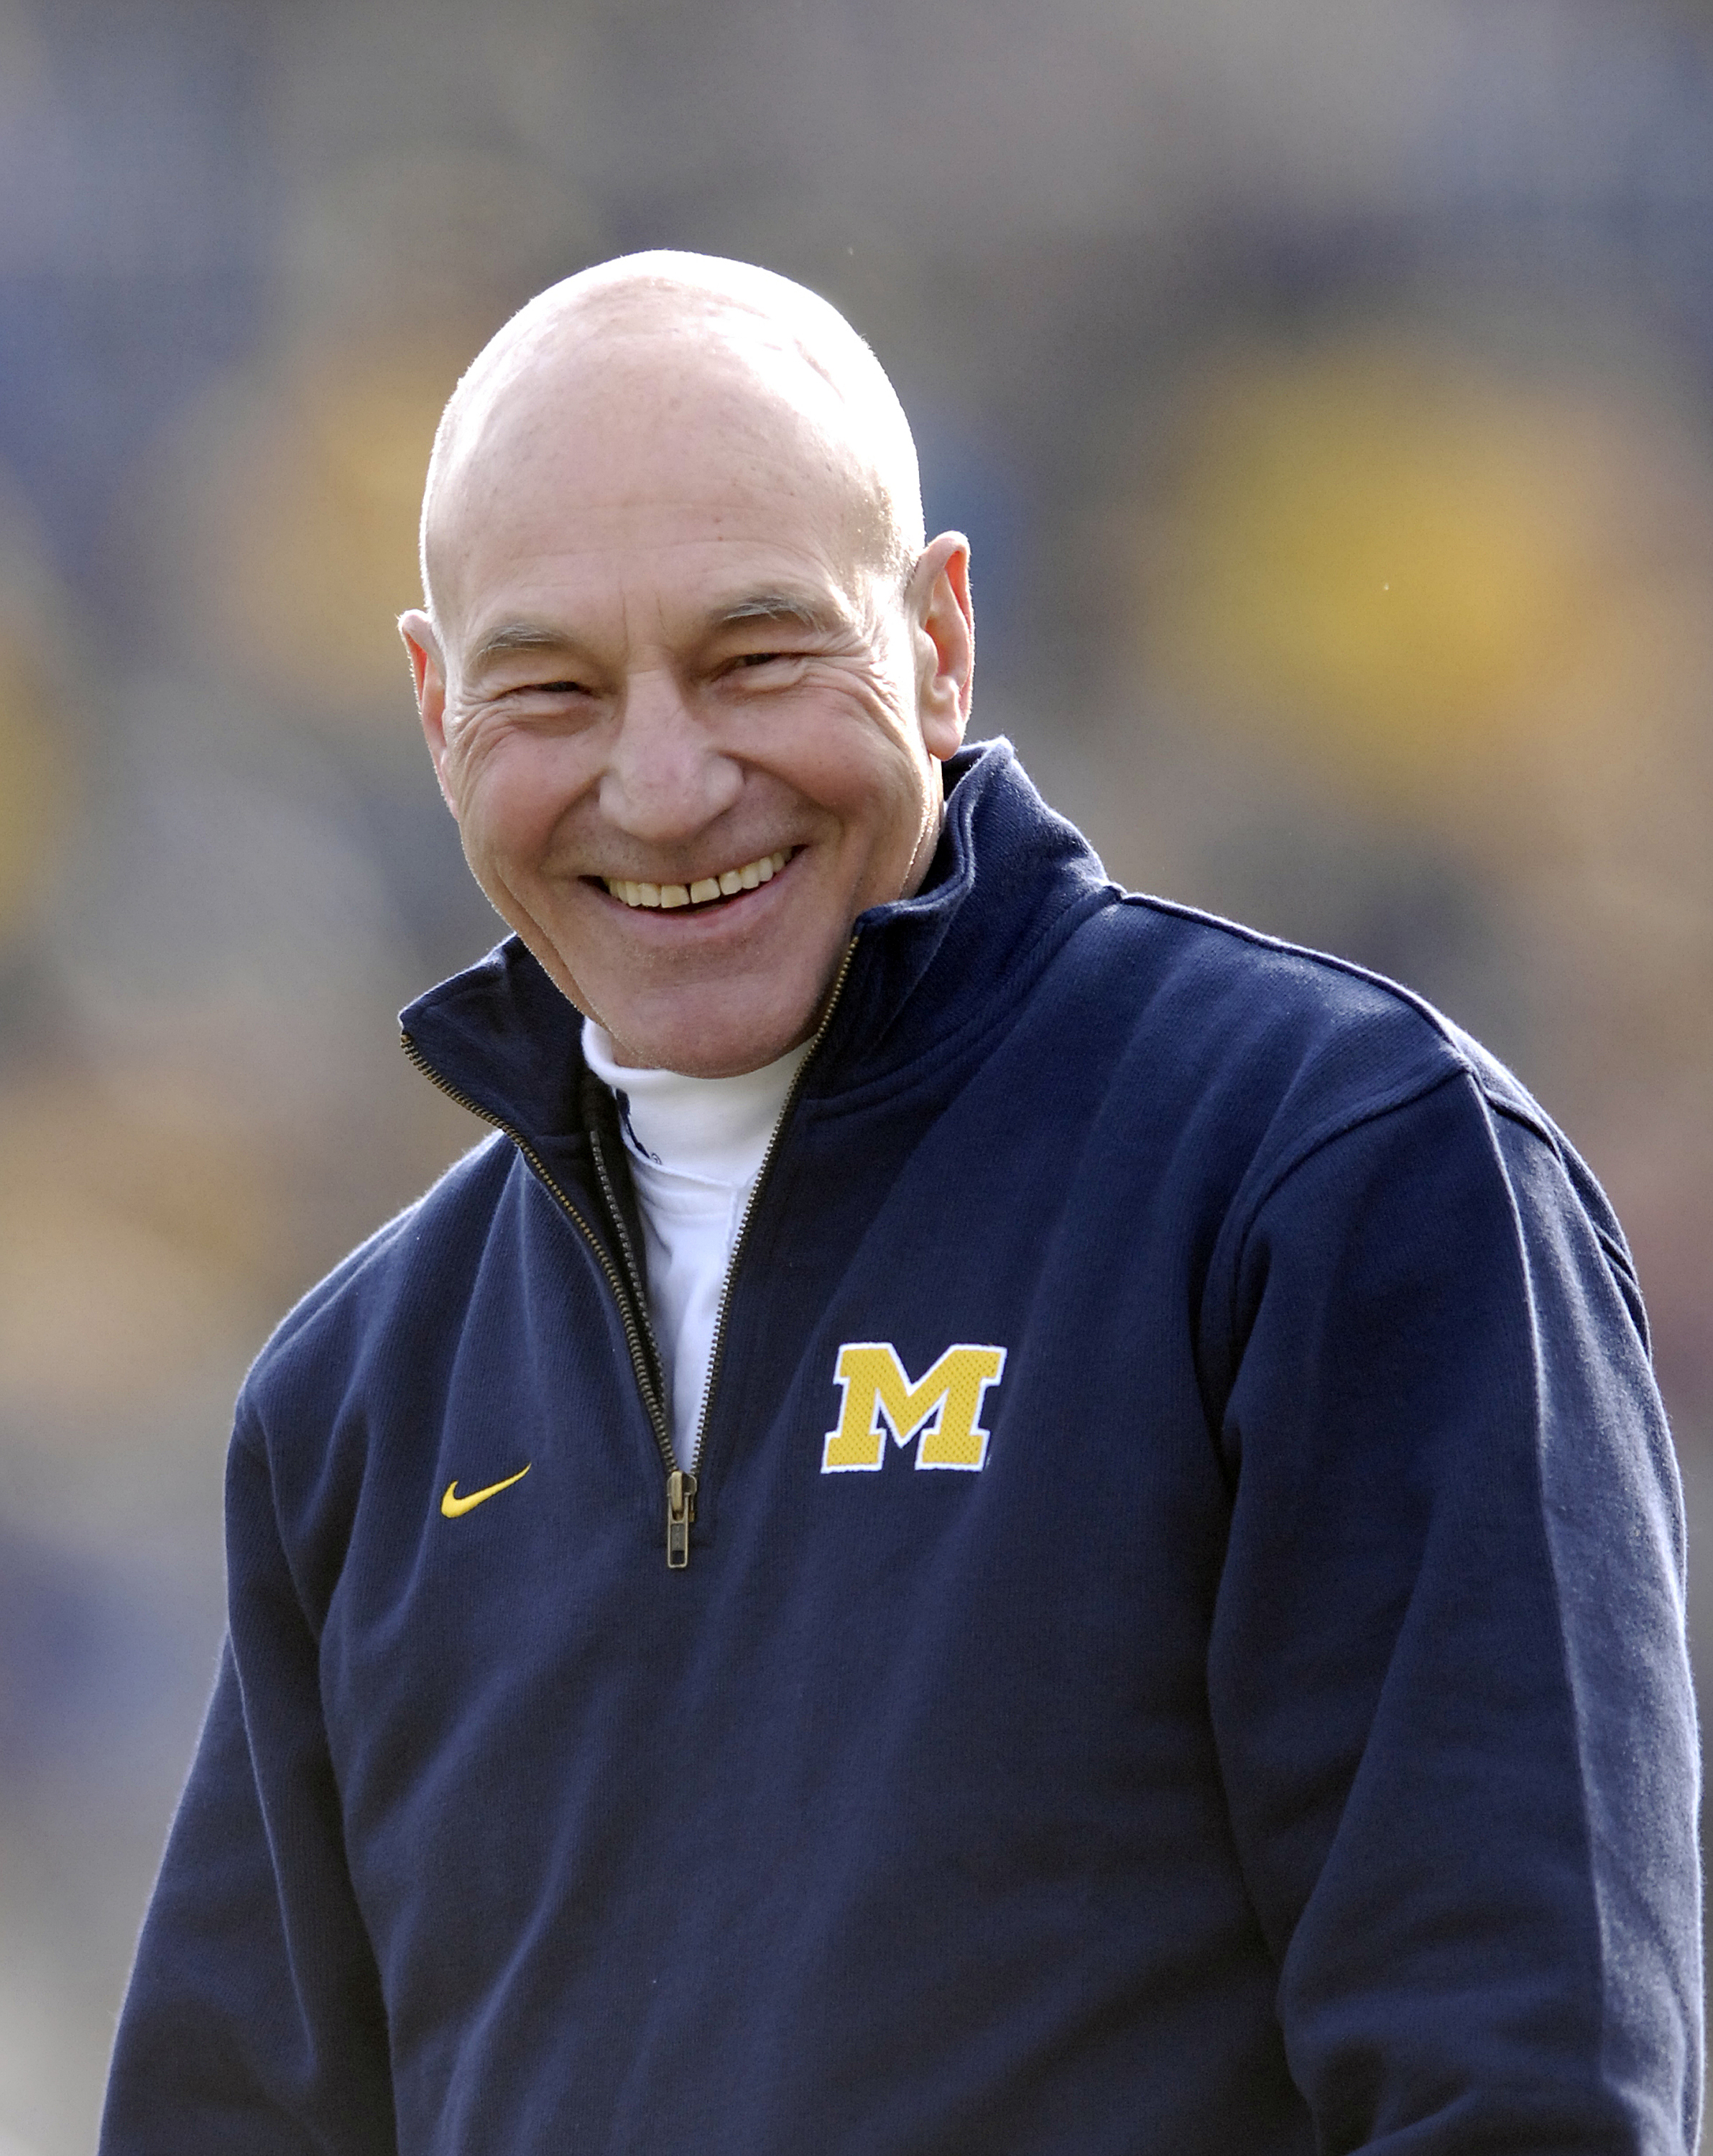 Patrick Stewart during the game between the Ball State Cardinals and the University of Michigan Wolverines in Ann Arbor, Michigan on November 4, 2006 | Source: Getty Images